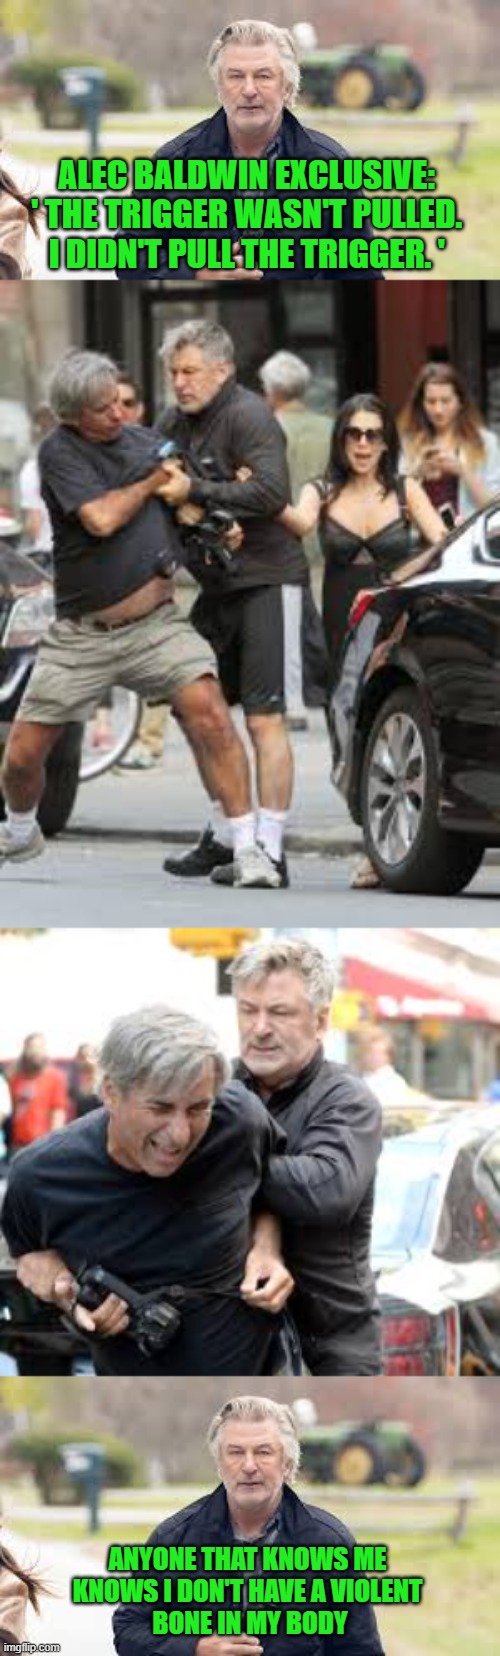 Alec Baldwin "Triggered" | ALEC BALDWIN EXCLUSIVE: 
' THE TRIGGER WASN'T PULLED. 
I DIDN'T PULL THE TRIGGER. '; ANYONE THAT KNOWS ME 
KNOWS I DON'T HAVE A VIOLENT 
BONE IN MY BODY | image tagged in alec baldwin,guns,liberal logic | made w/ Imgflip meme maker